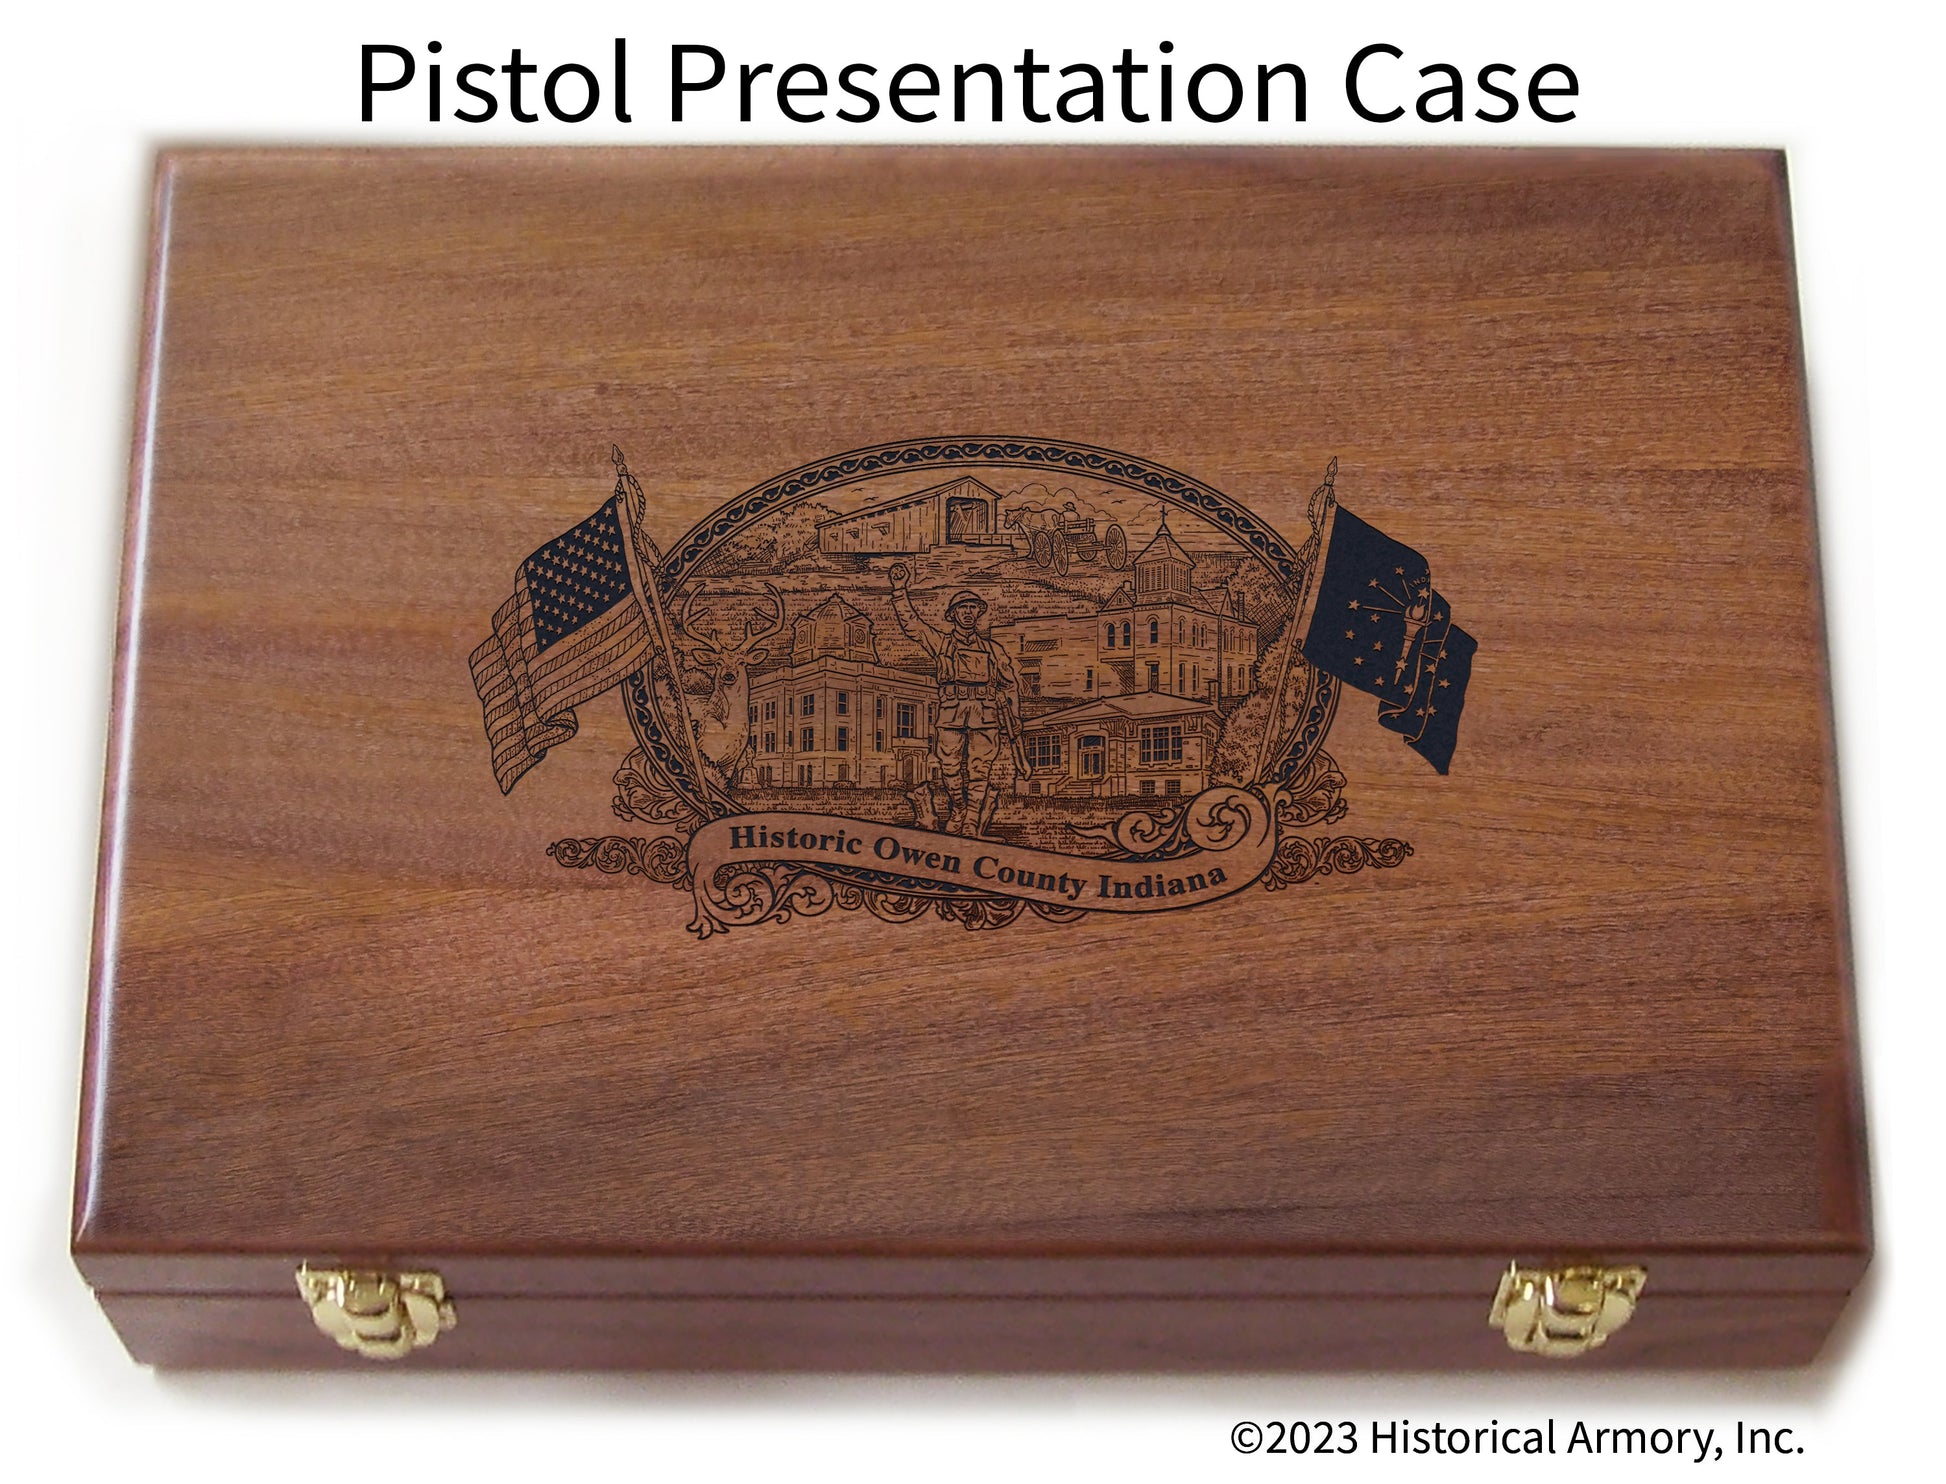 Owen County Indiana Engraved .45 Auto Ruger 1911 Presentation Case